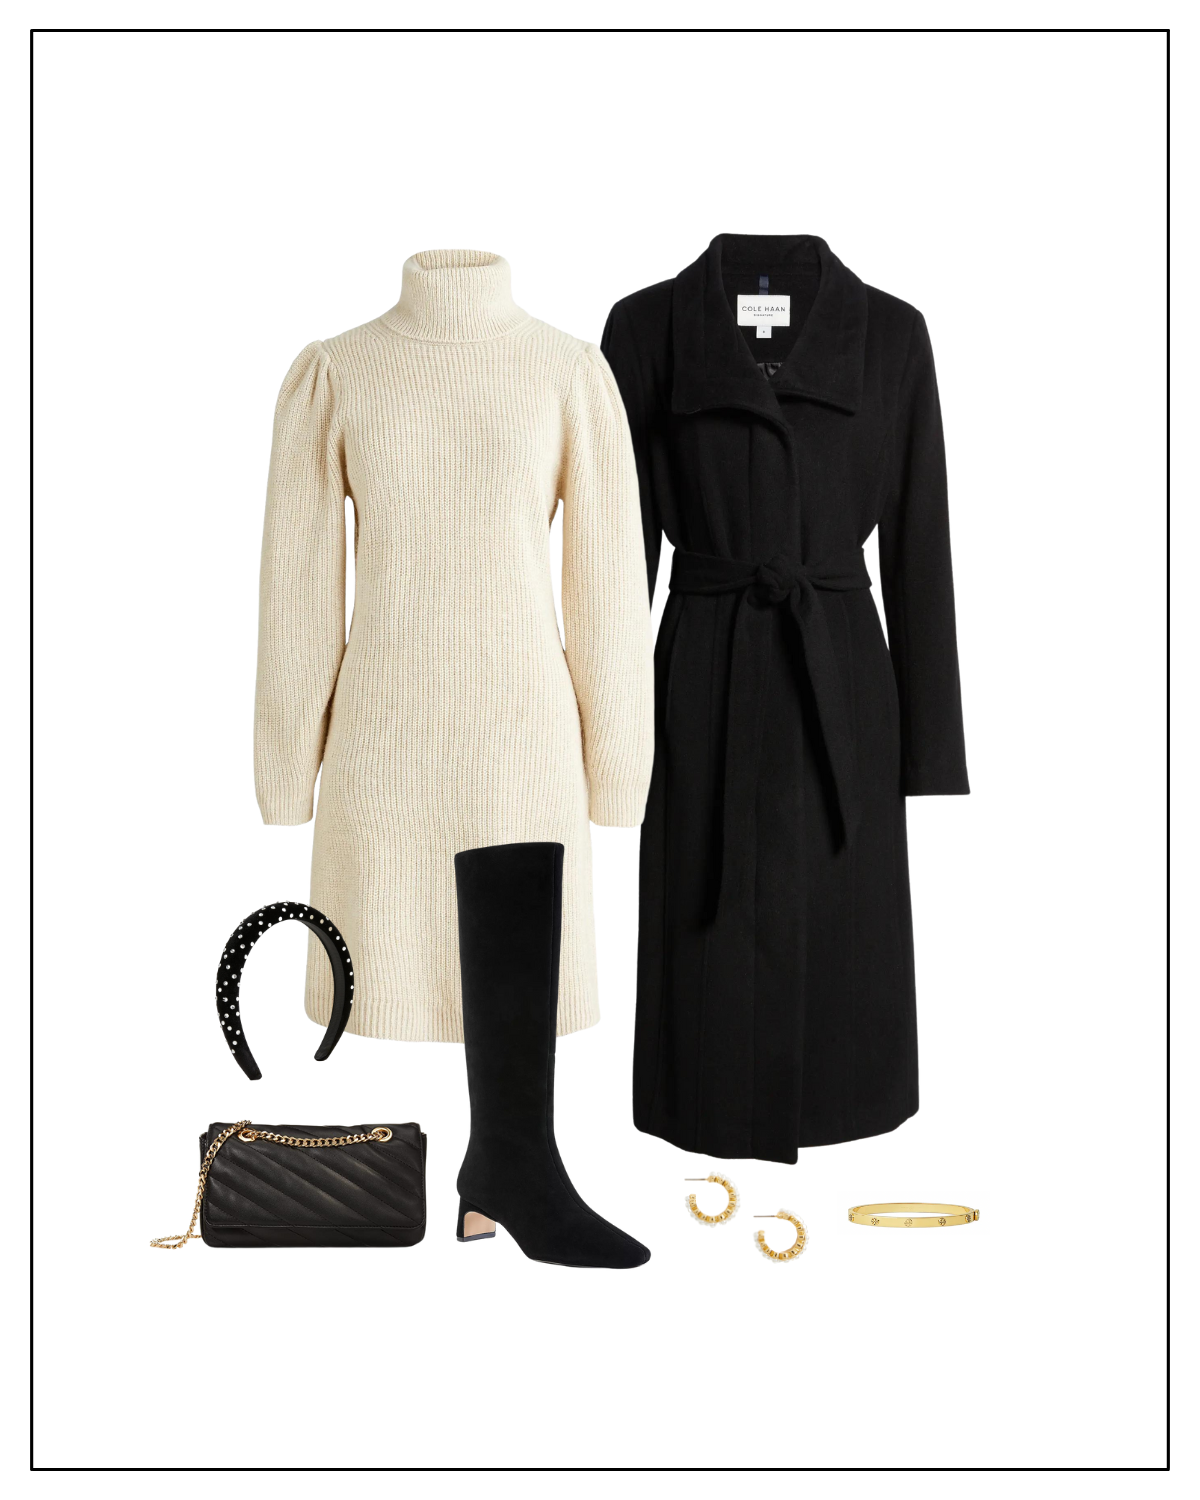 Sweater Dress New Years Outfit Ideas